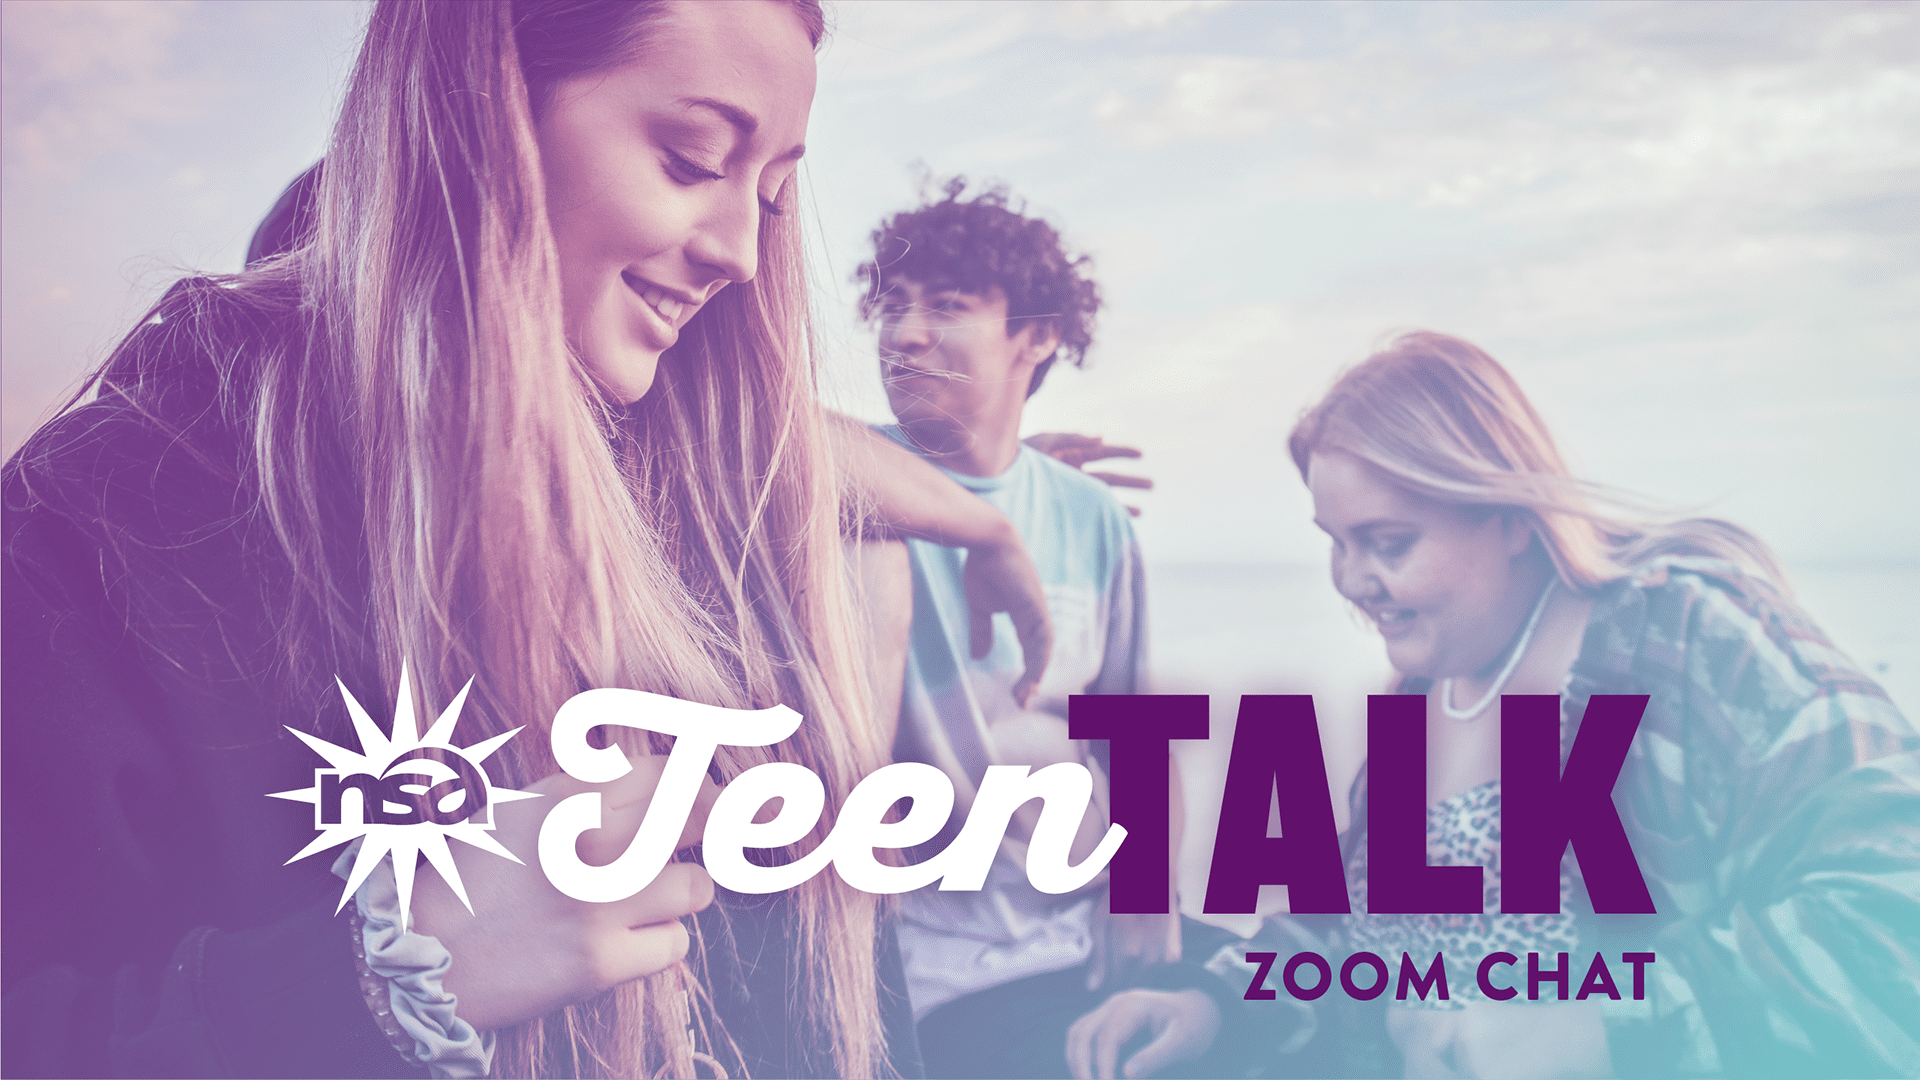 Promotional graphic for "TeenTalk Zoom Chat" showing three joyful teenagers at a seaside, with the "TeenTalk" logo in the foreground. The image uses a cool, purple overlay.